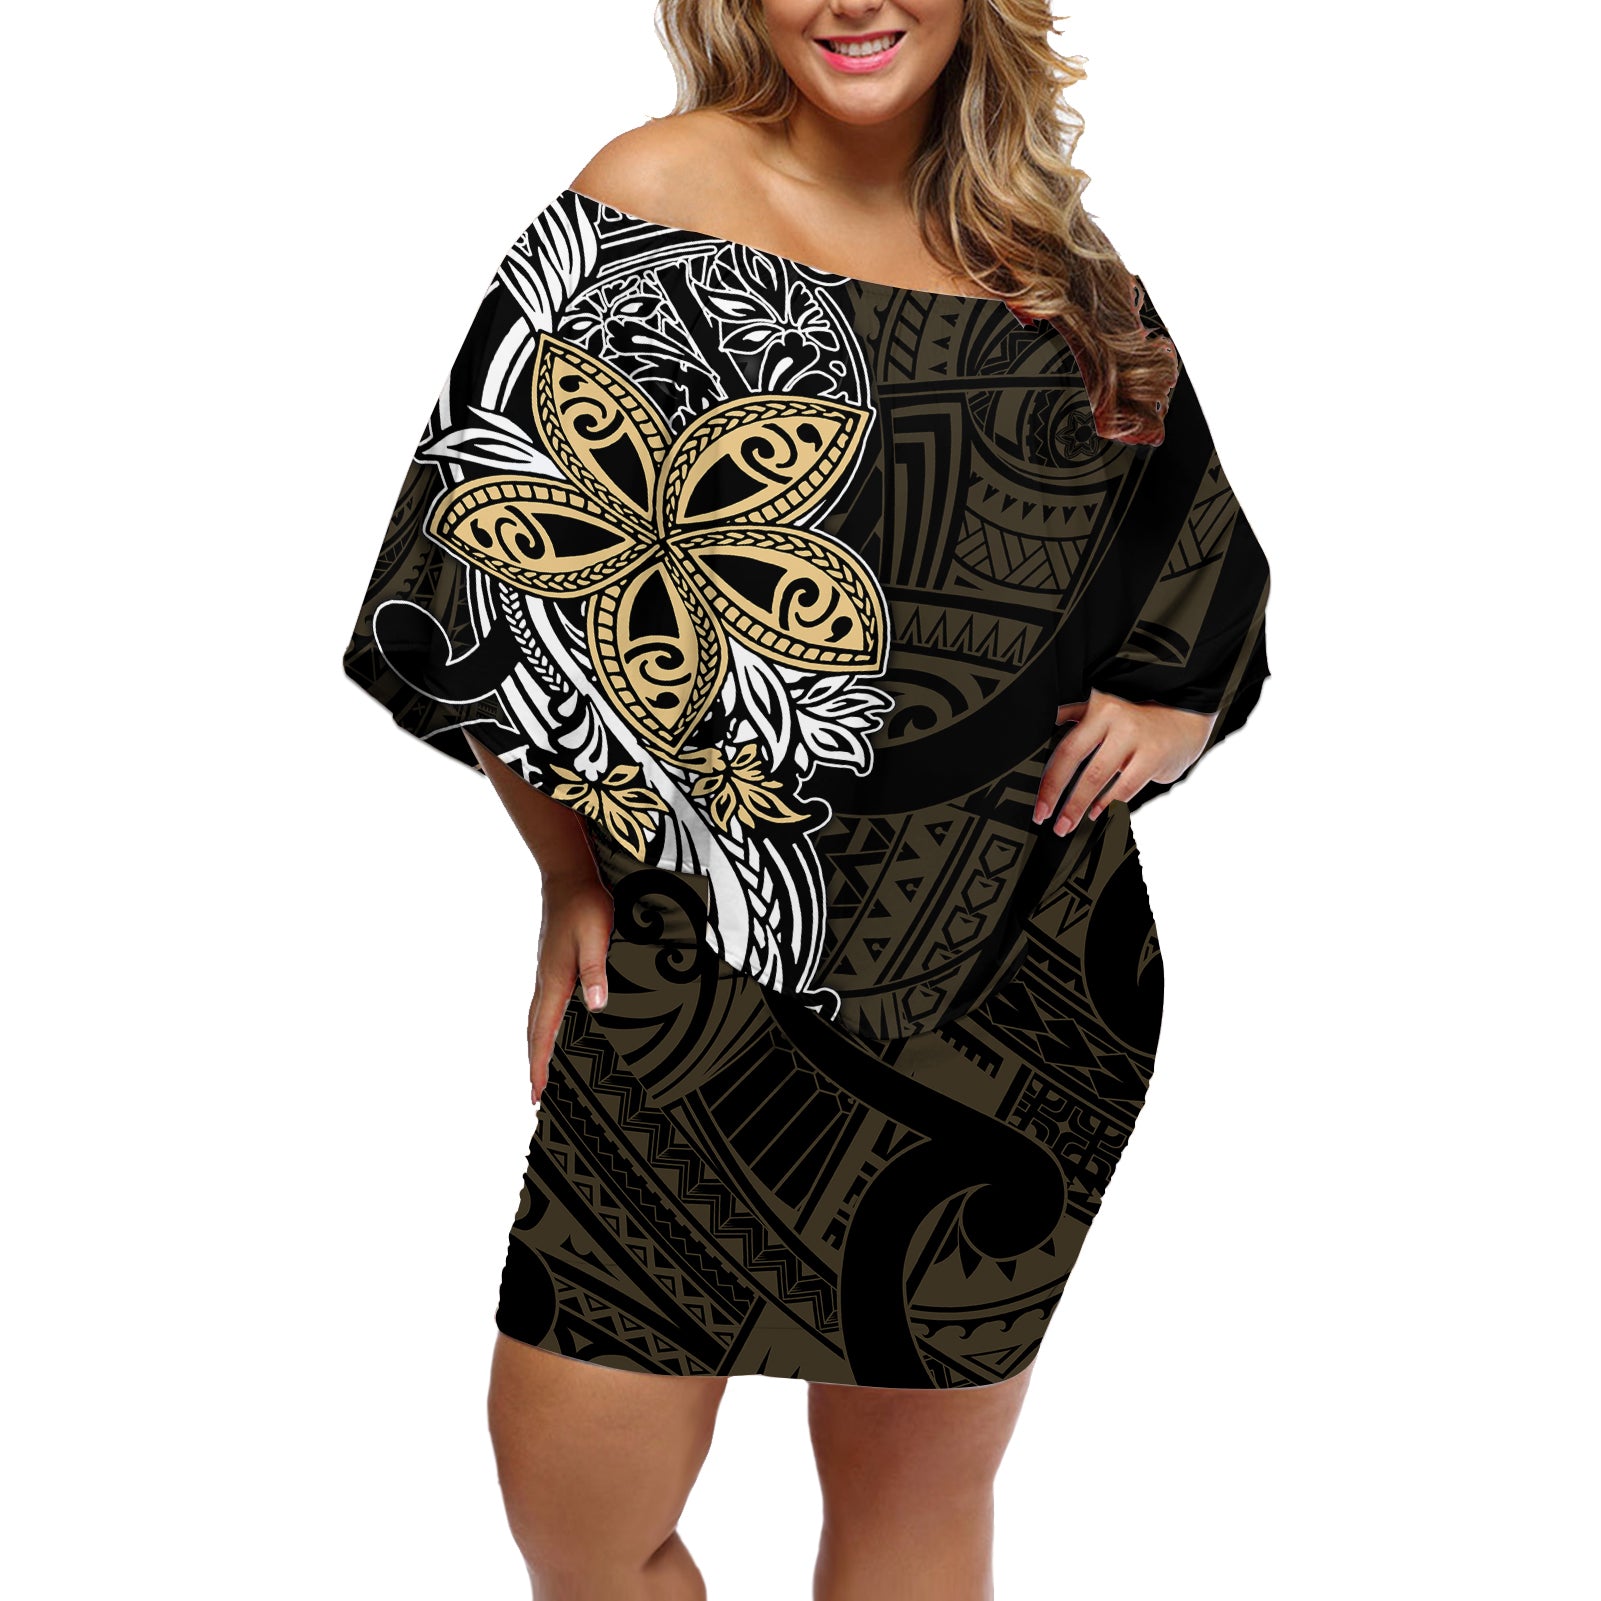 polynesian-pride-off-shoulder-short-dress-tiare-with-plumeria-mix-style